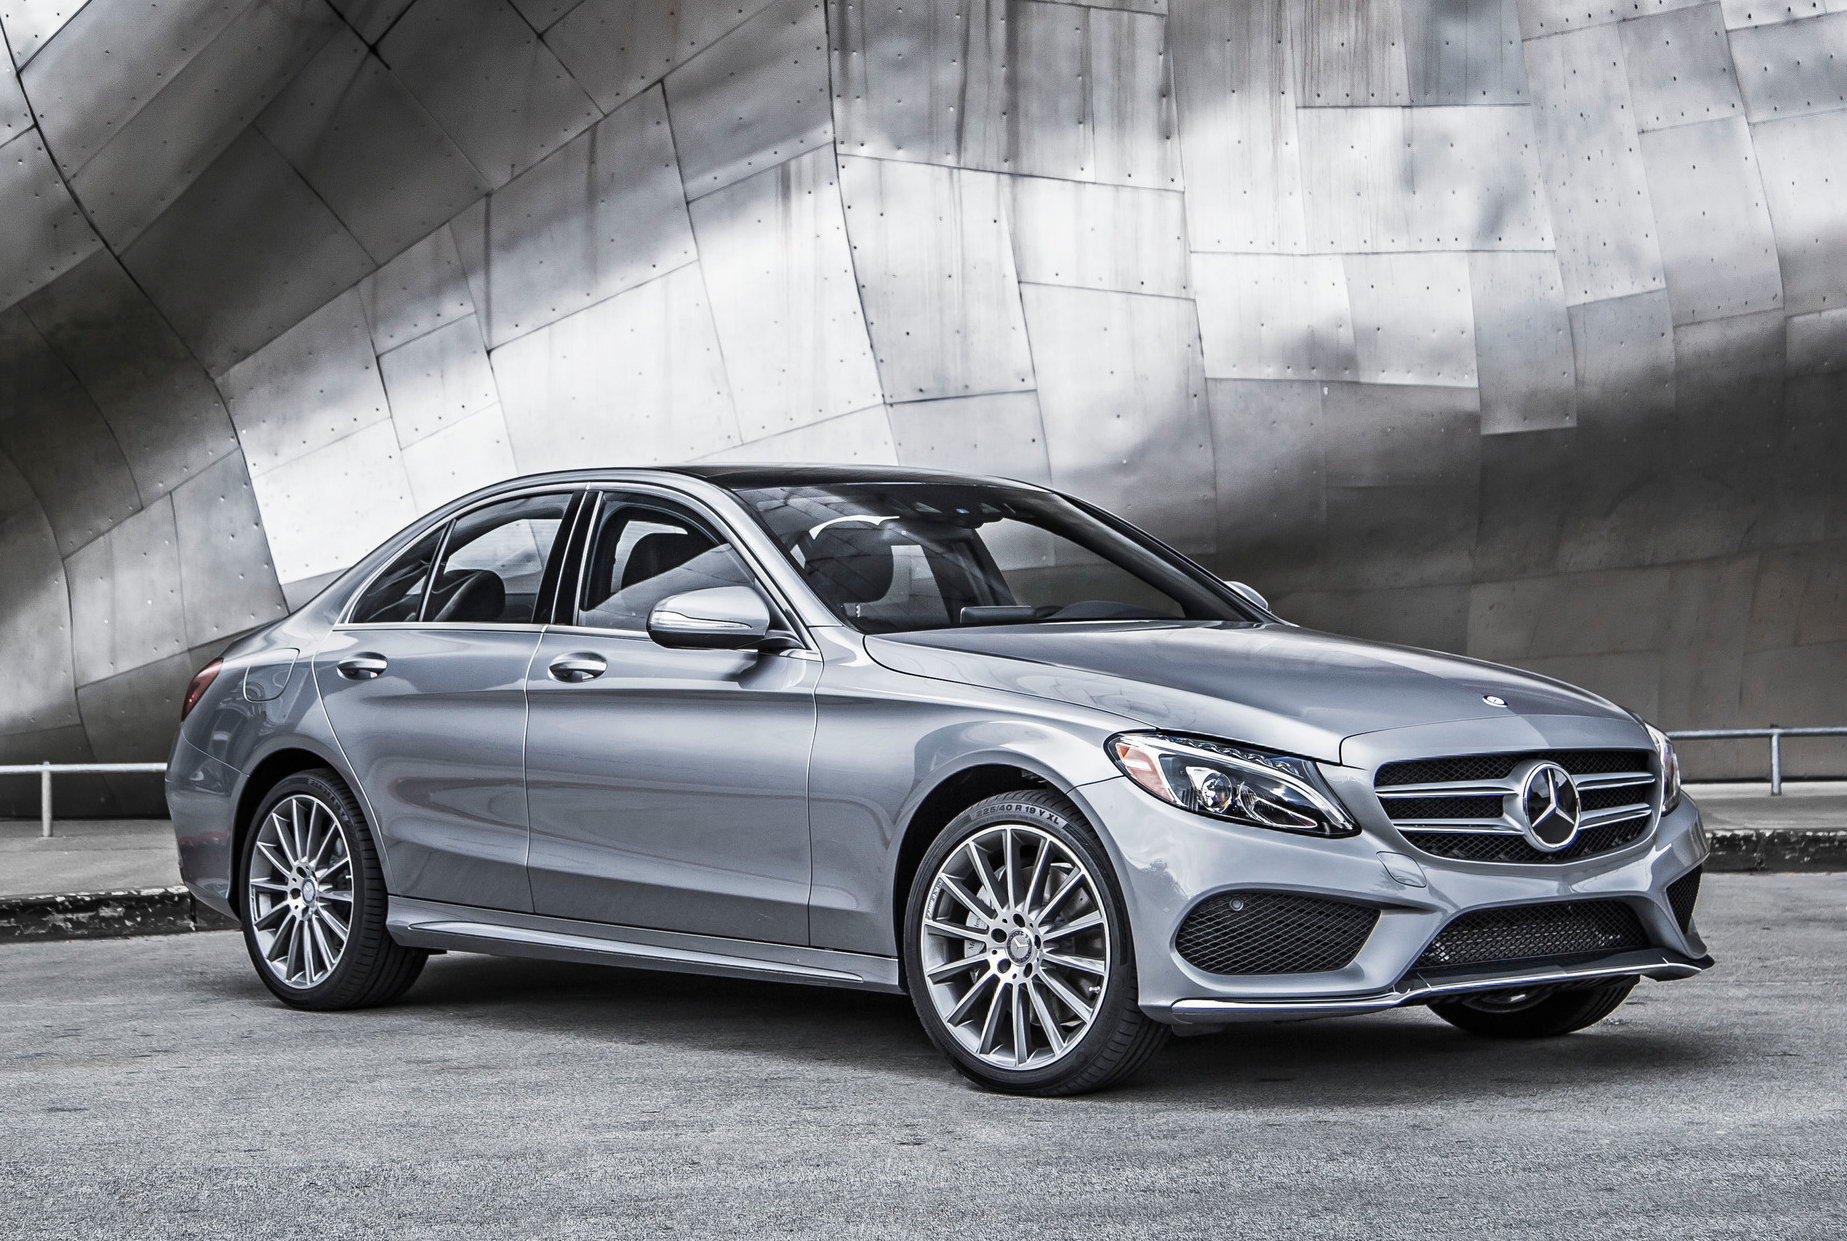 Review: 2015 Mercedes Benz C300 And C400